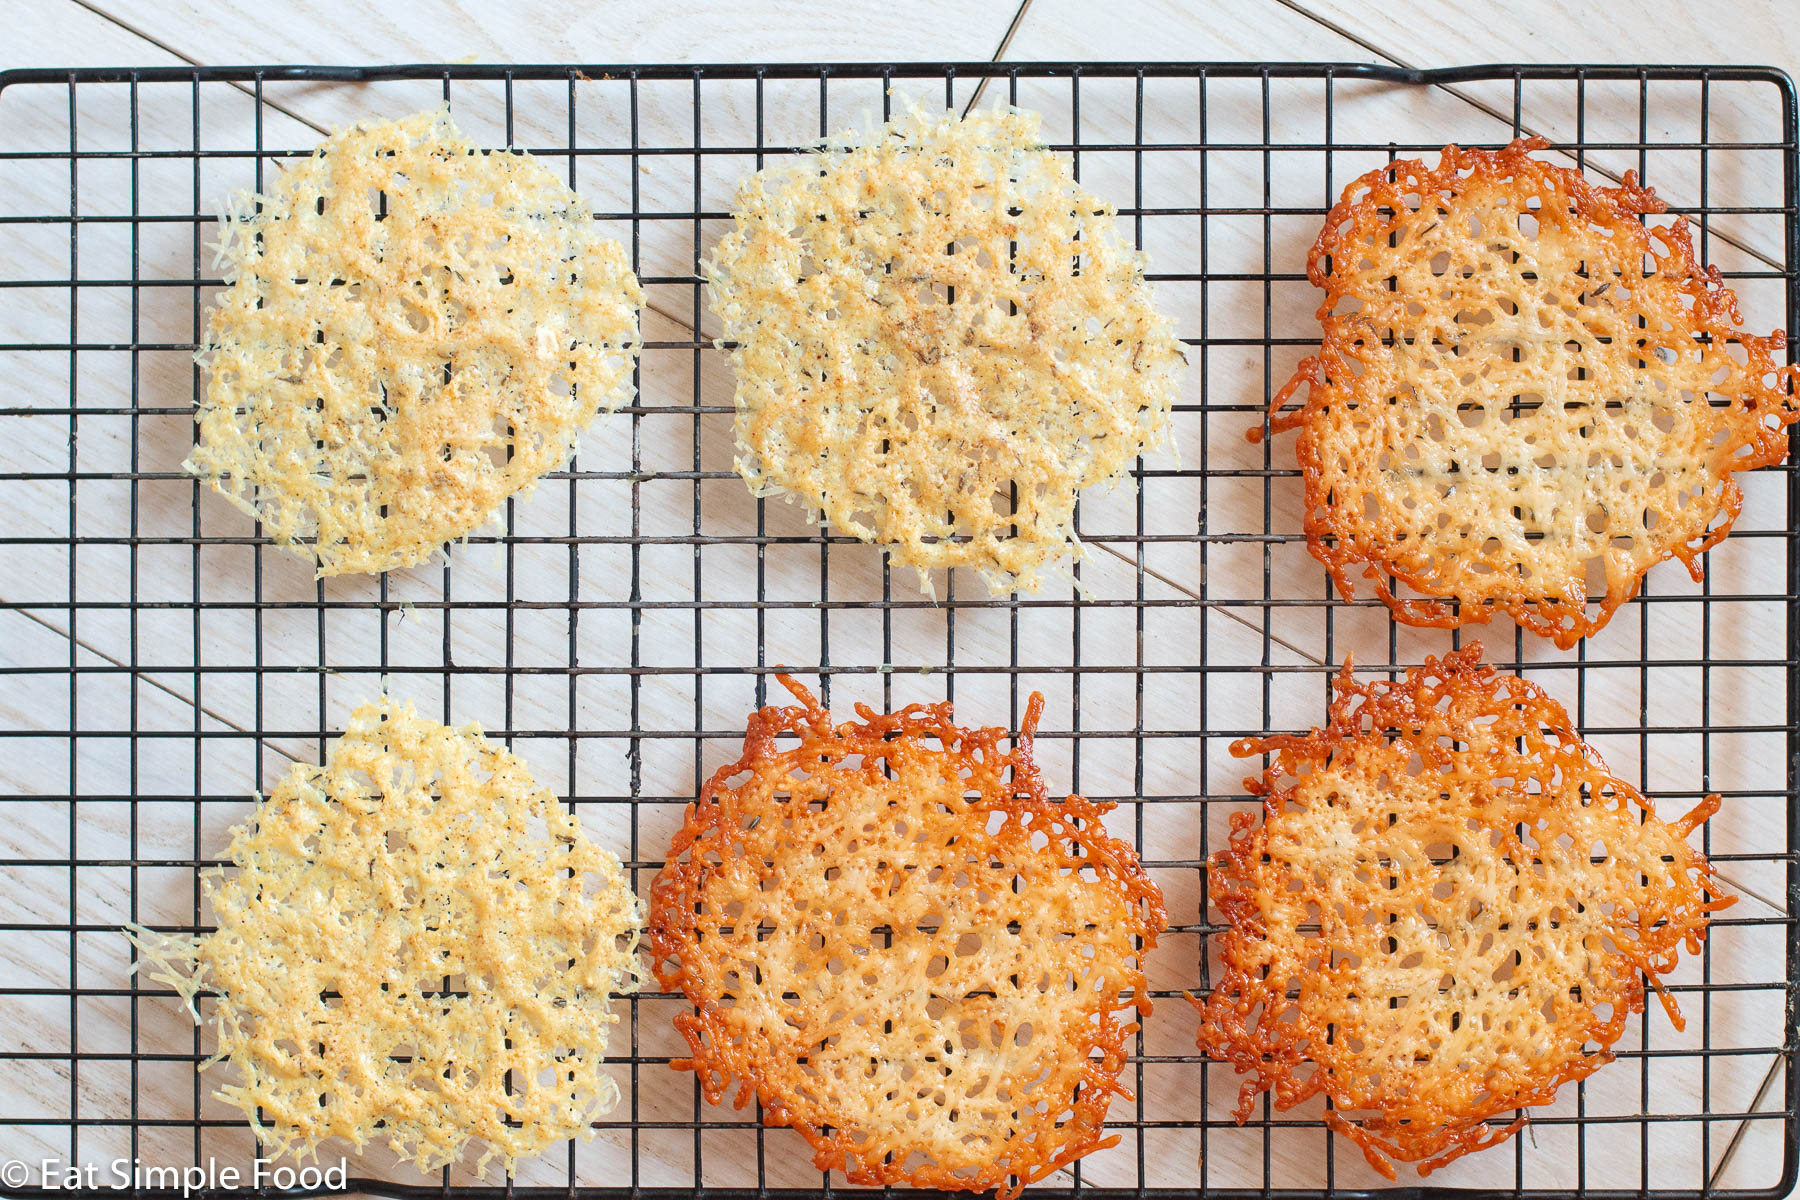 6 Parmesan crisps on an elevated wire rack on a white table. 3 are darker and 3 are lighter in color.